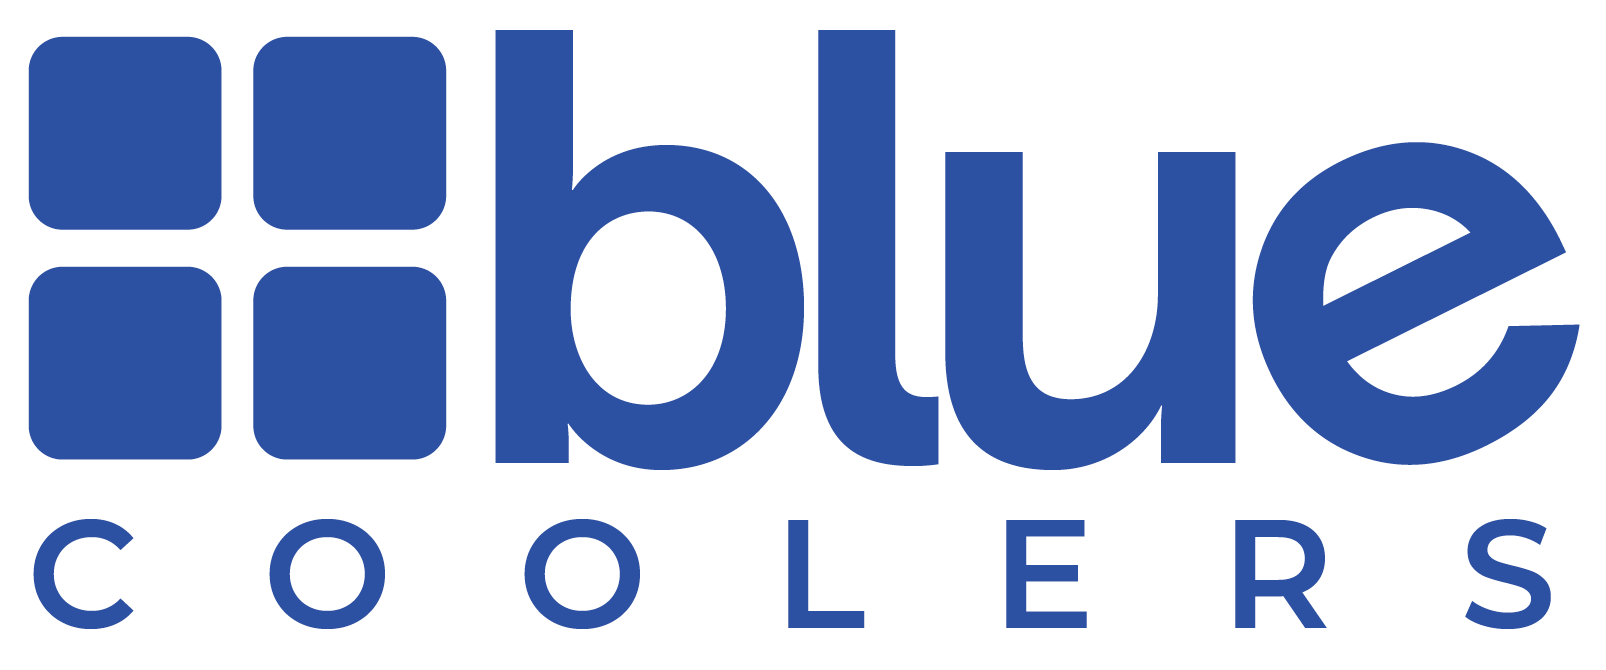 Blue Coolers Coupons & Promo codes